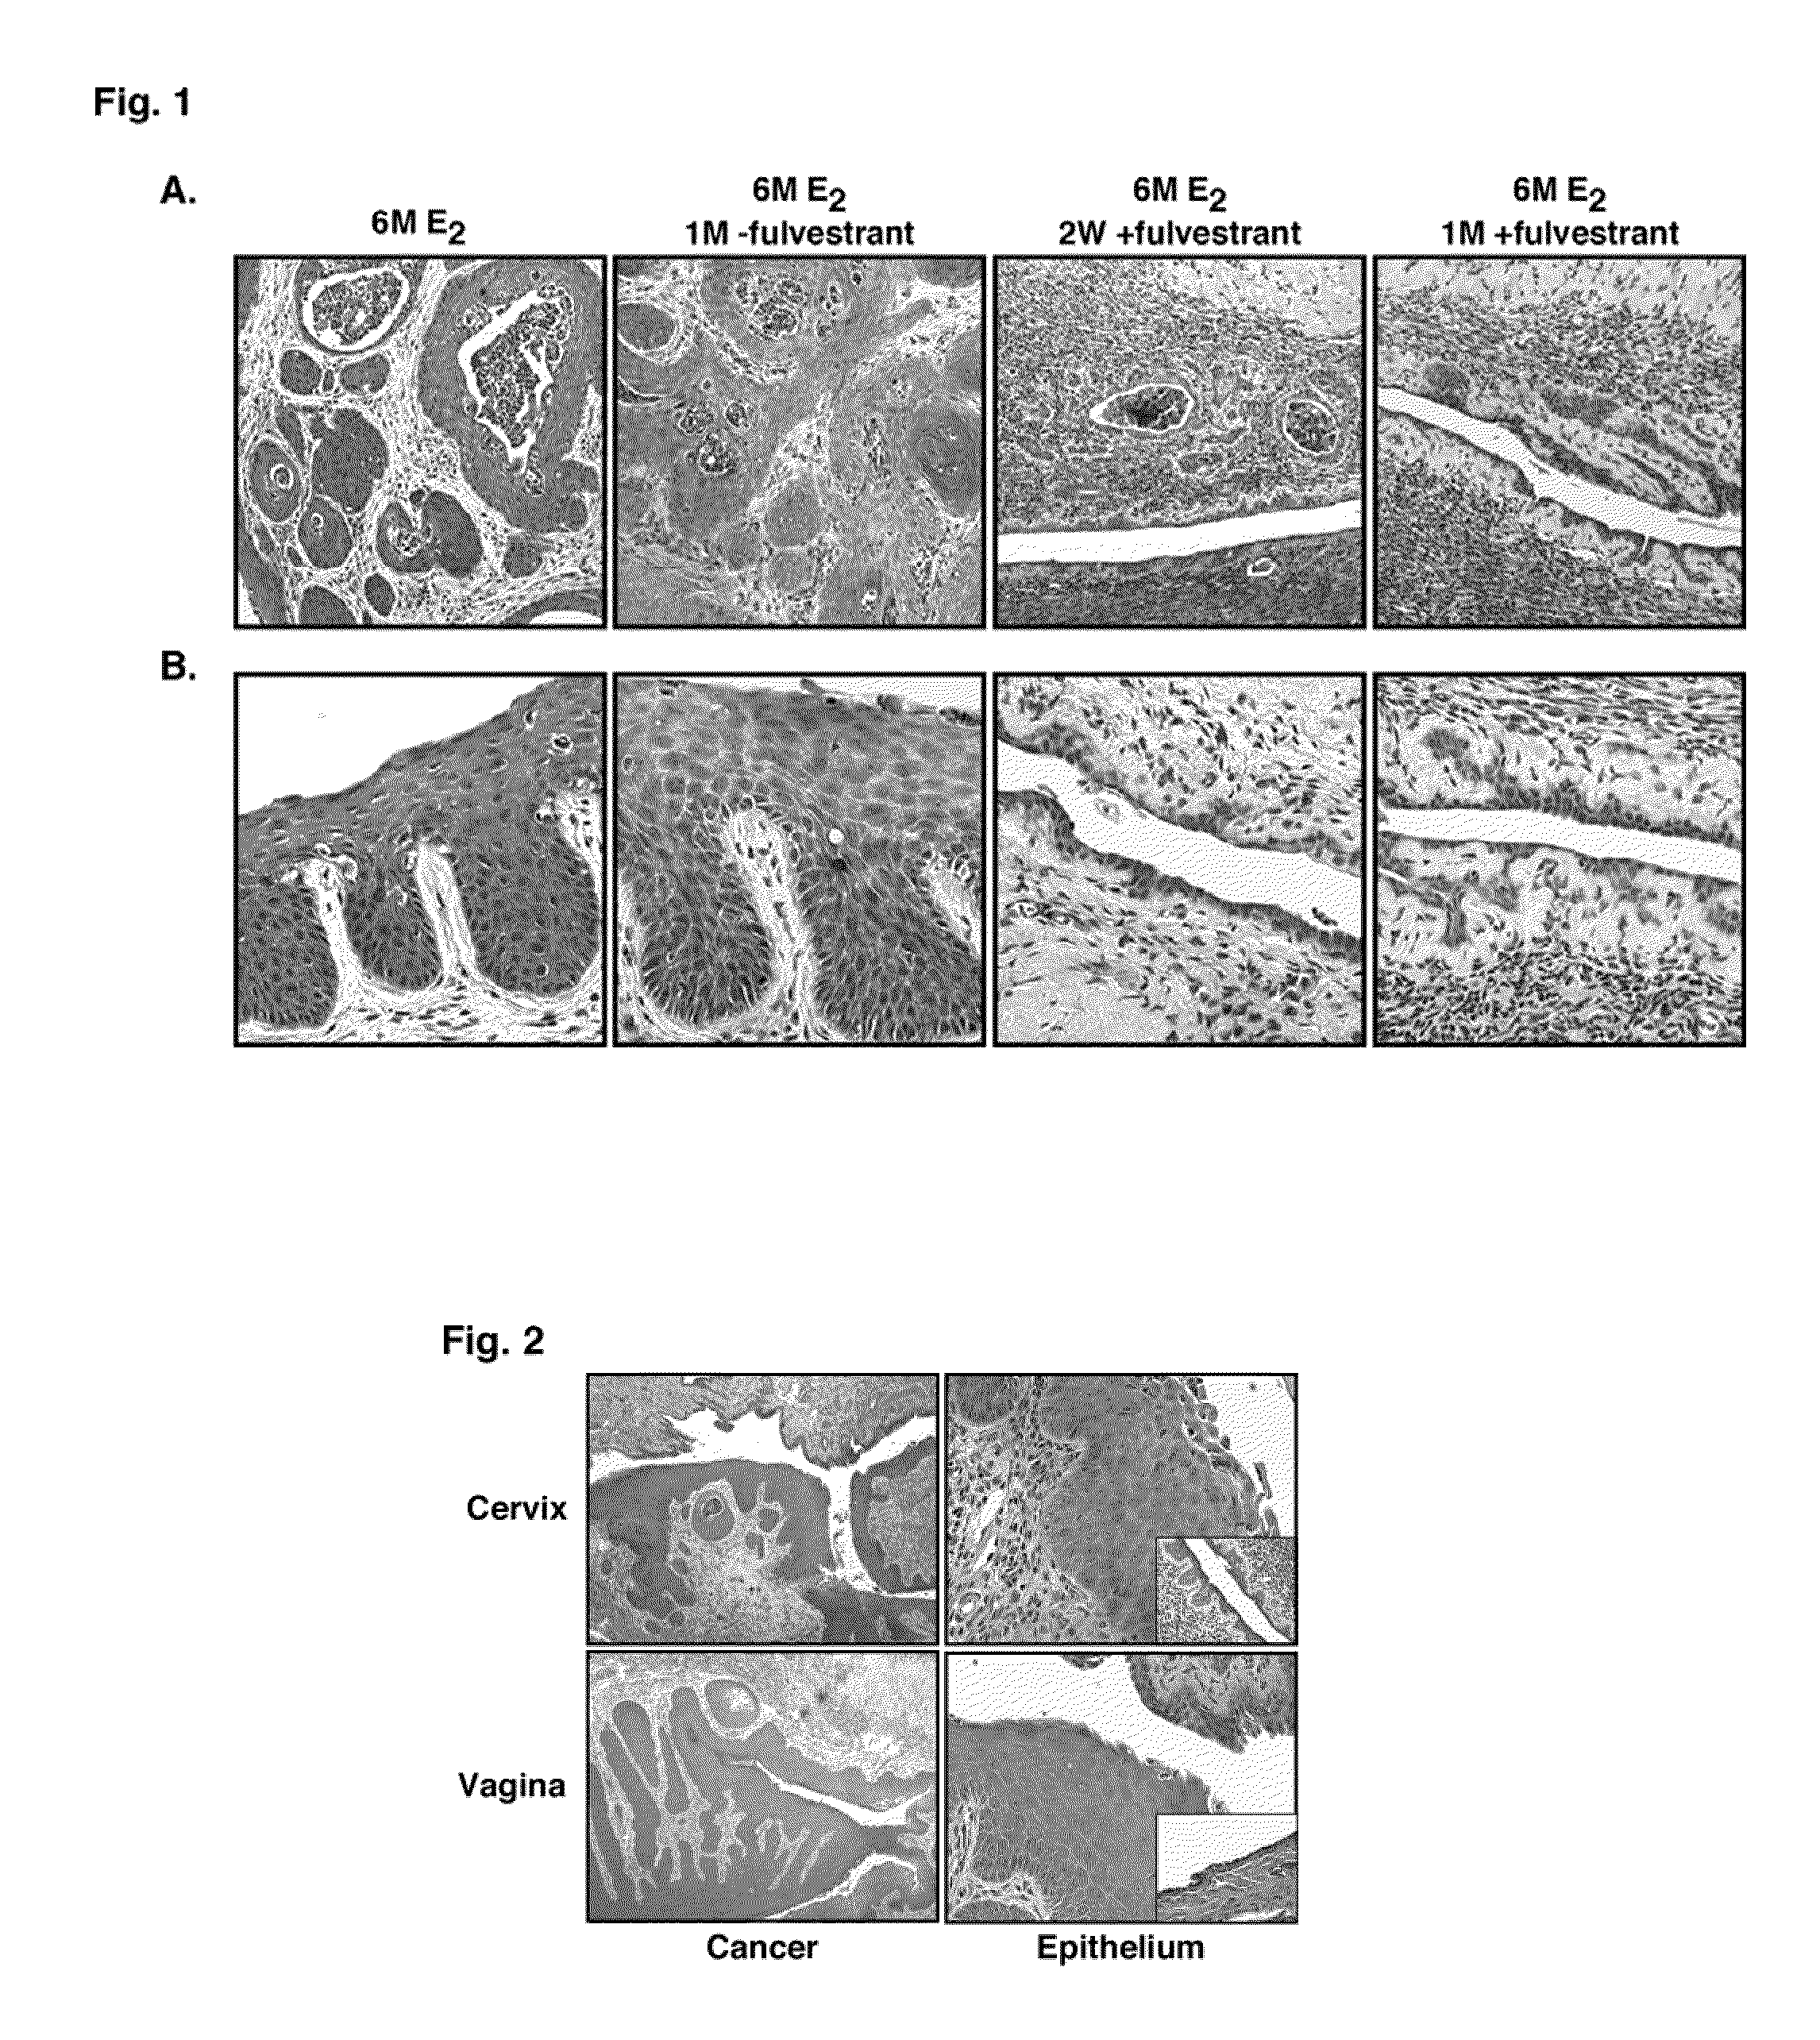 Therapeutic treatment of cancer and dysplasia of the cervix or vagina using estrogen antagonists